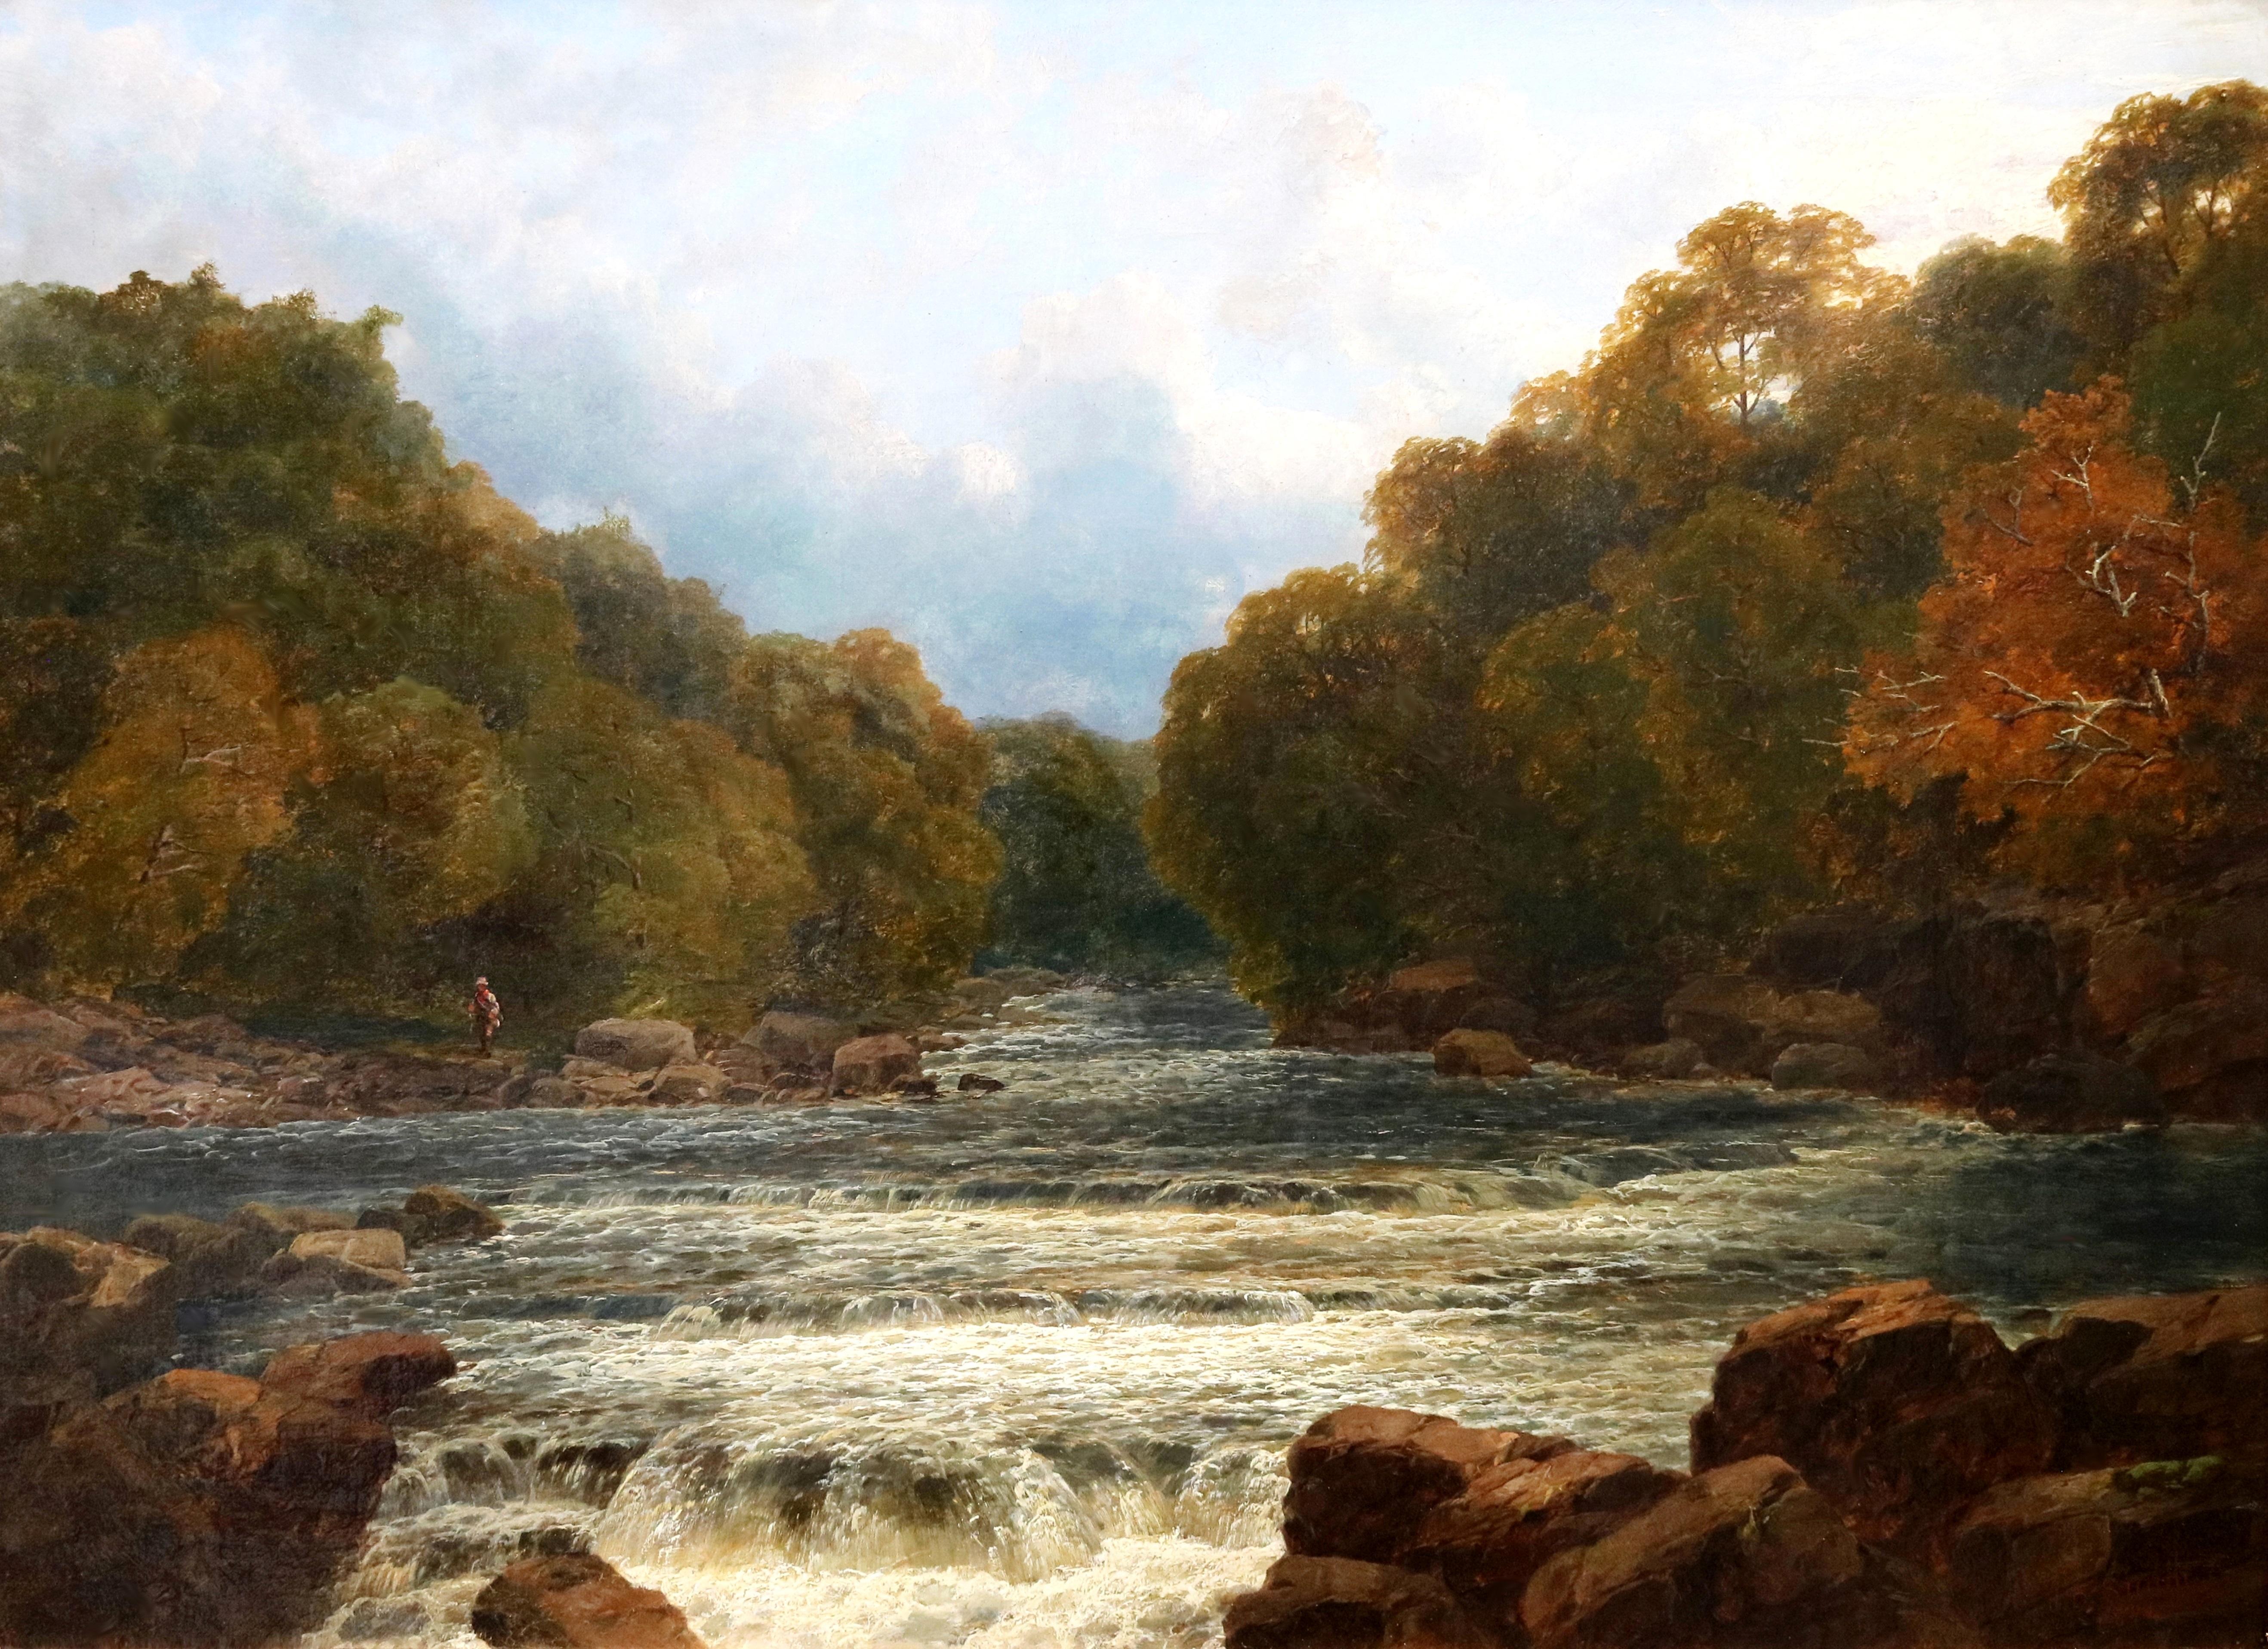 ‘On the Dee, North Wales’ by John Brandon Smith 1834-1885. The painting – which depicts an extensive view of the rapids on the river Dee – is signed by the artist and dated 1874.

All our paintings are sold in the finest condition they can be for